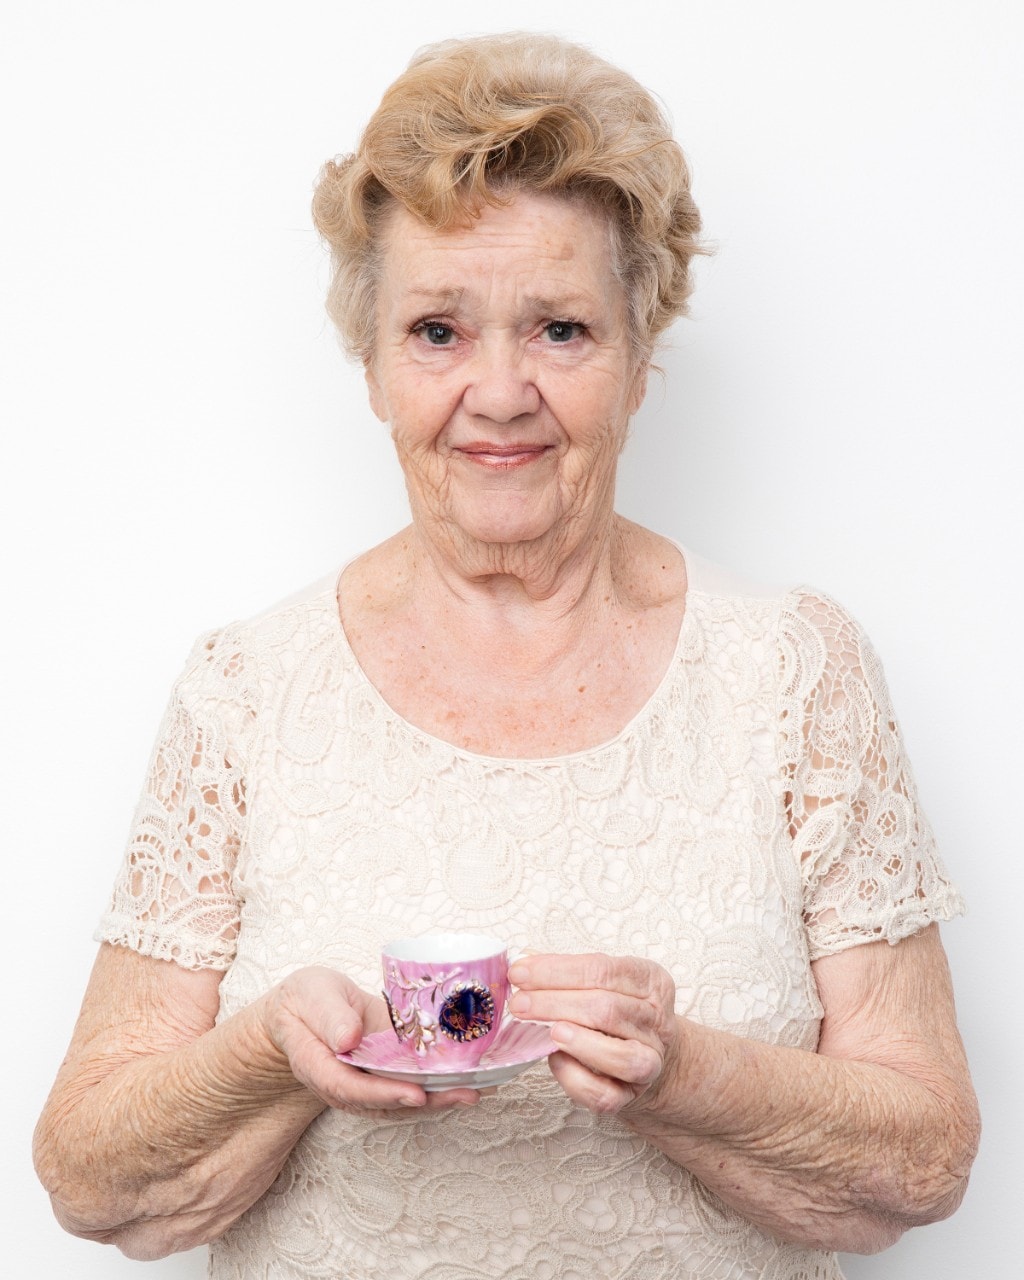 Treasured Possessions participant Maureen Lyndon holds an ornate pink tea cup. Image: Jason Cole